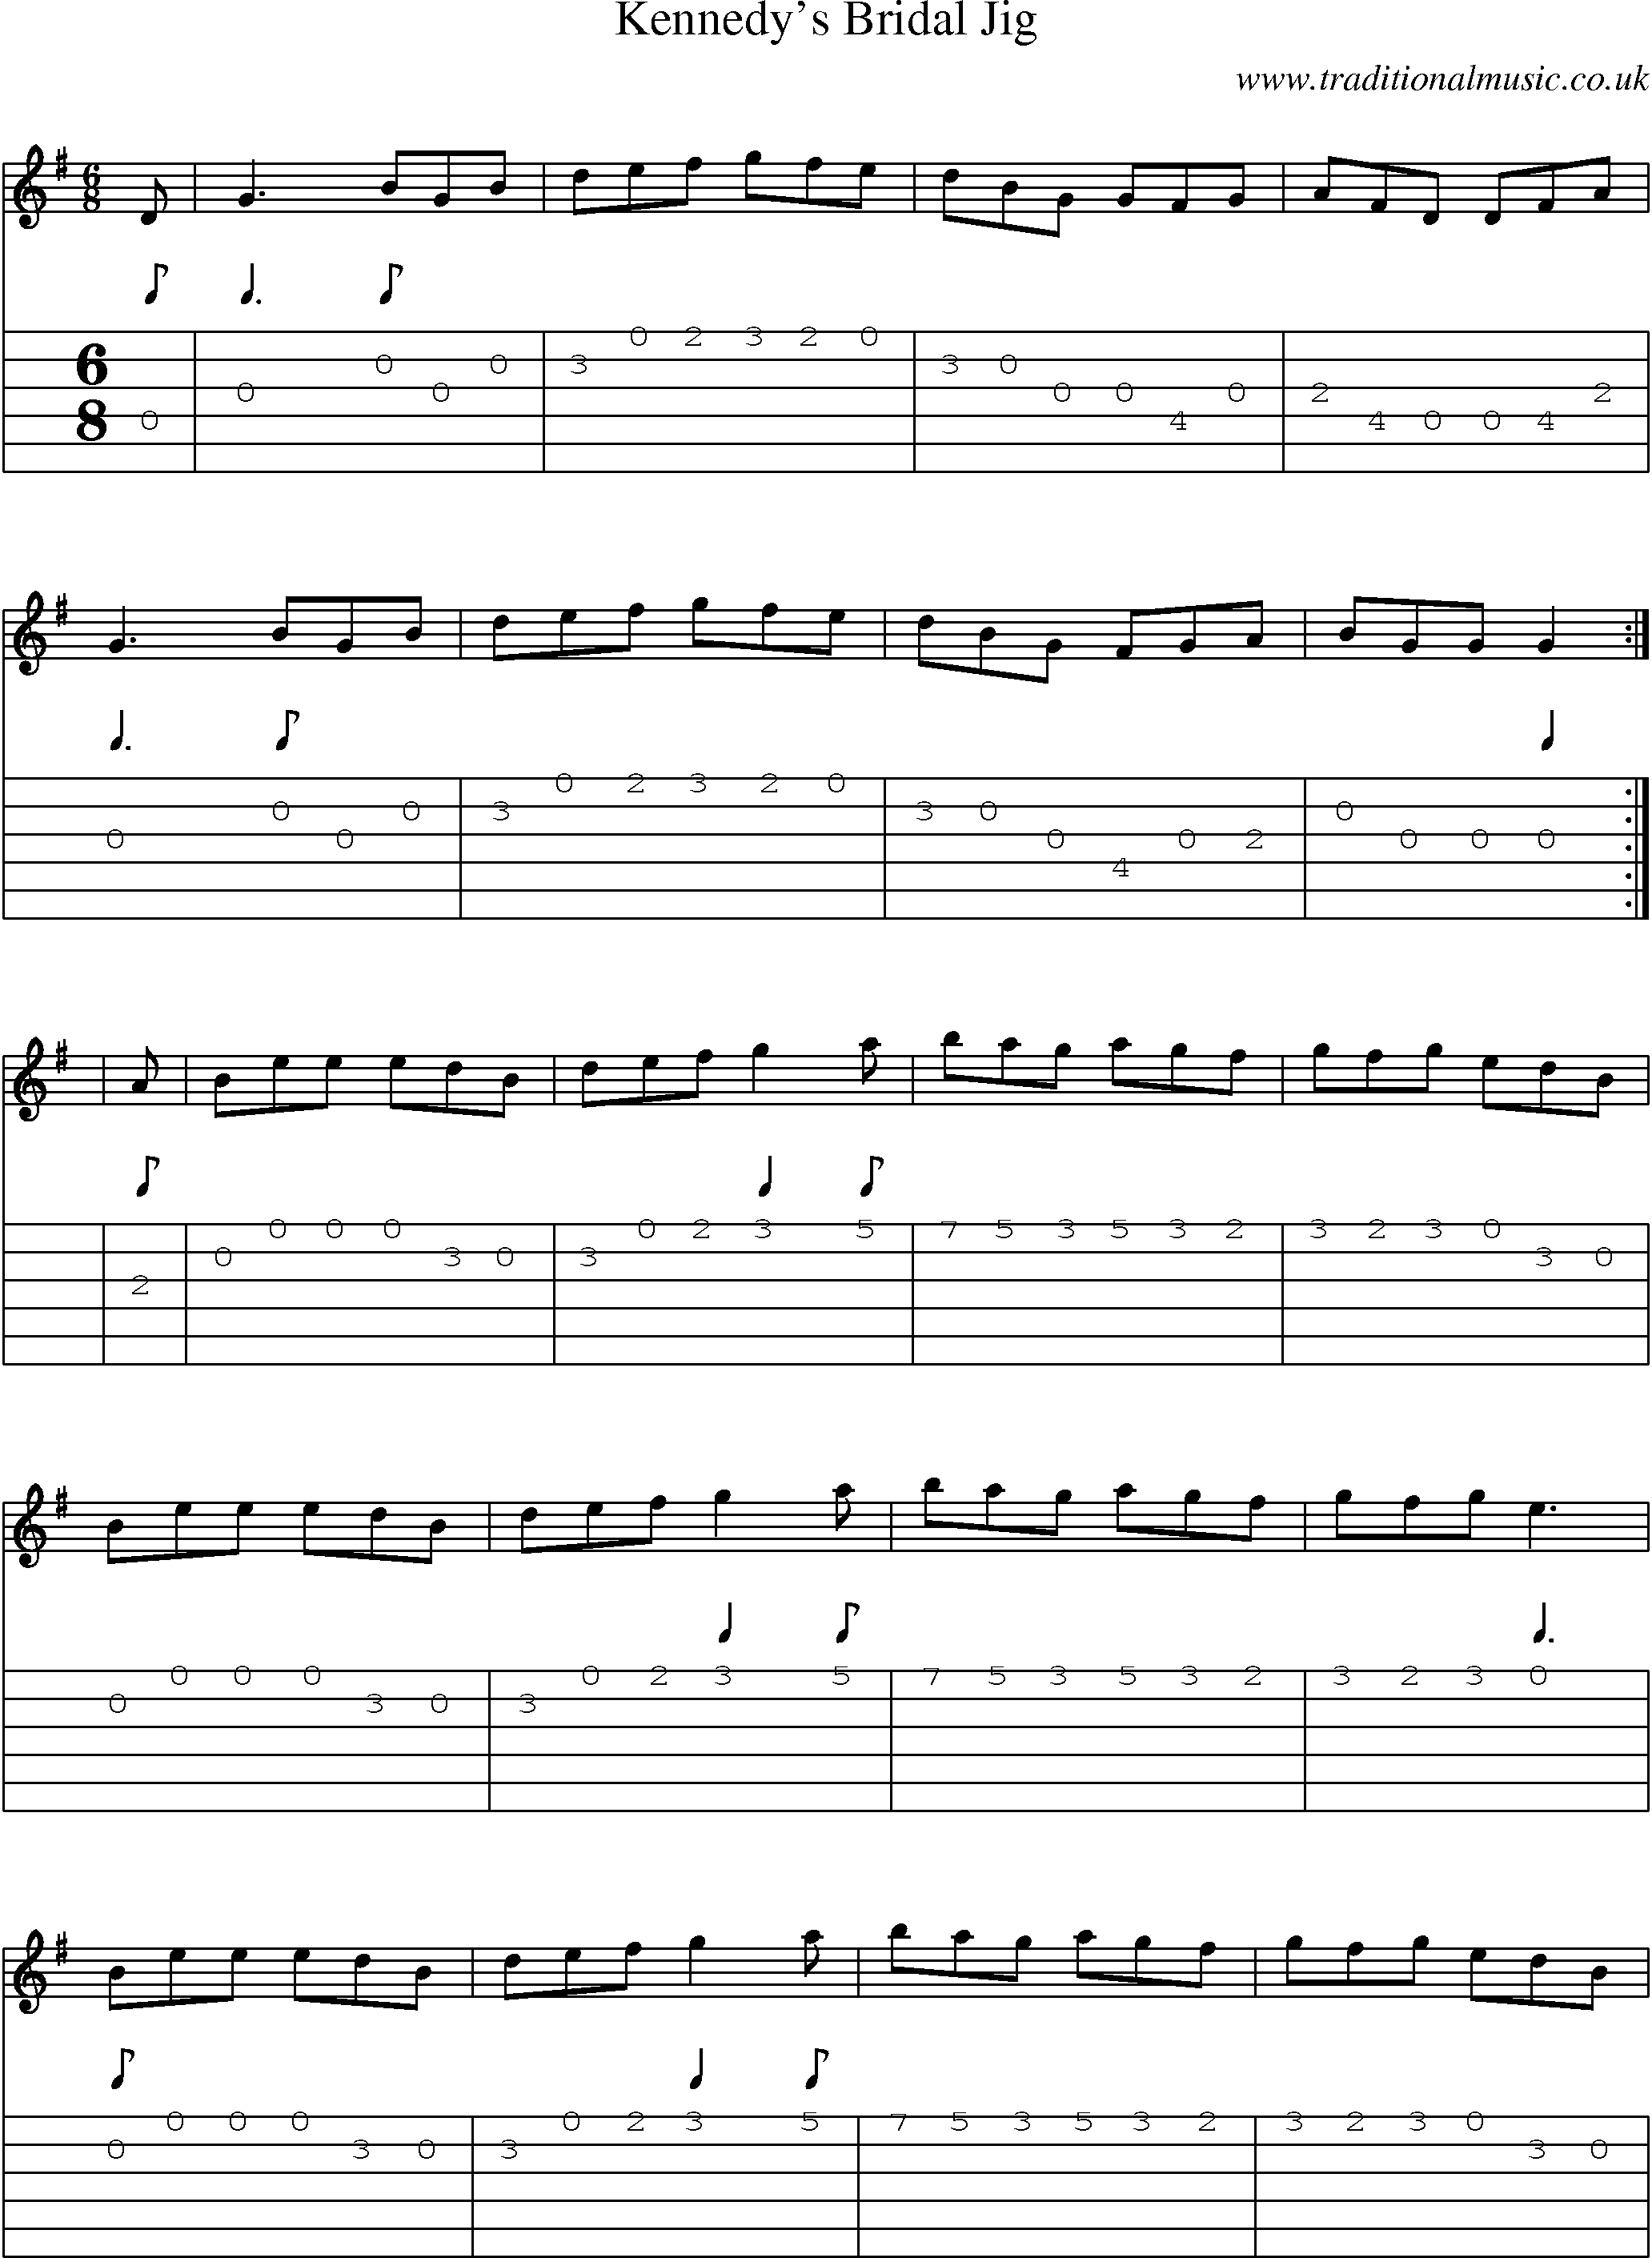 Music Score and Guitar Tabs for Kennedys Bridal Jig